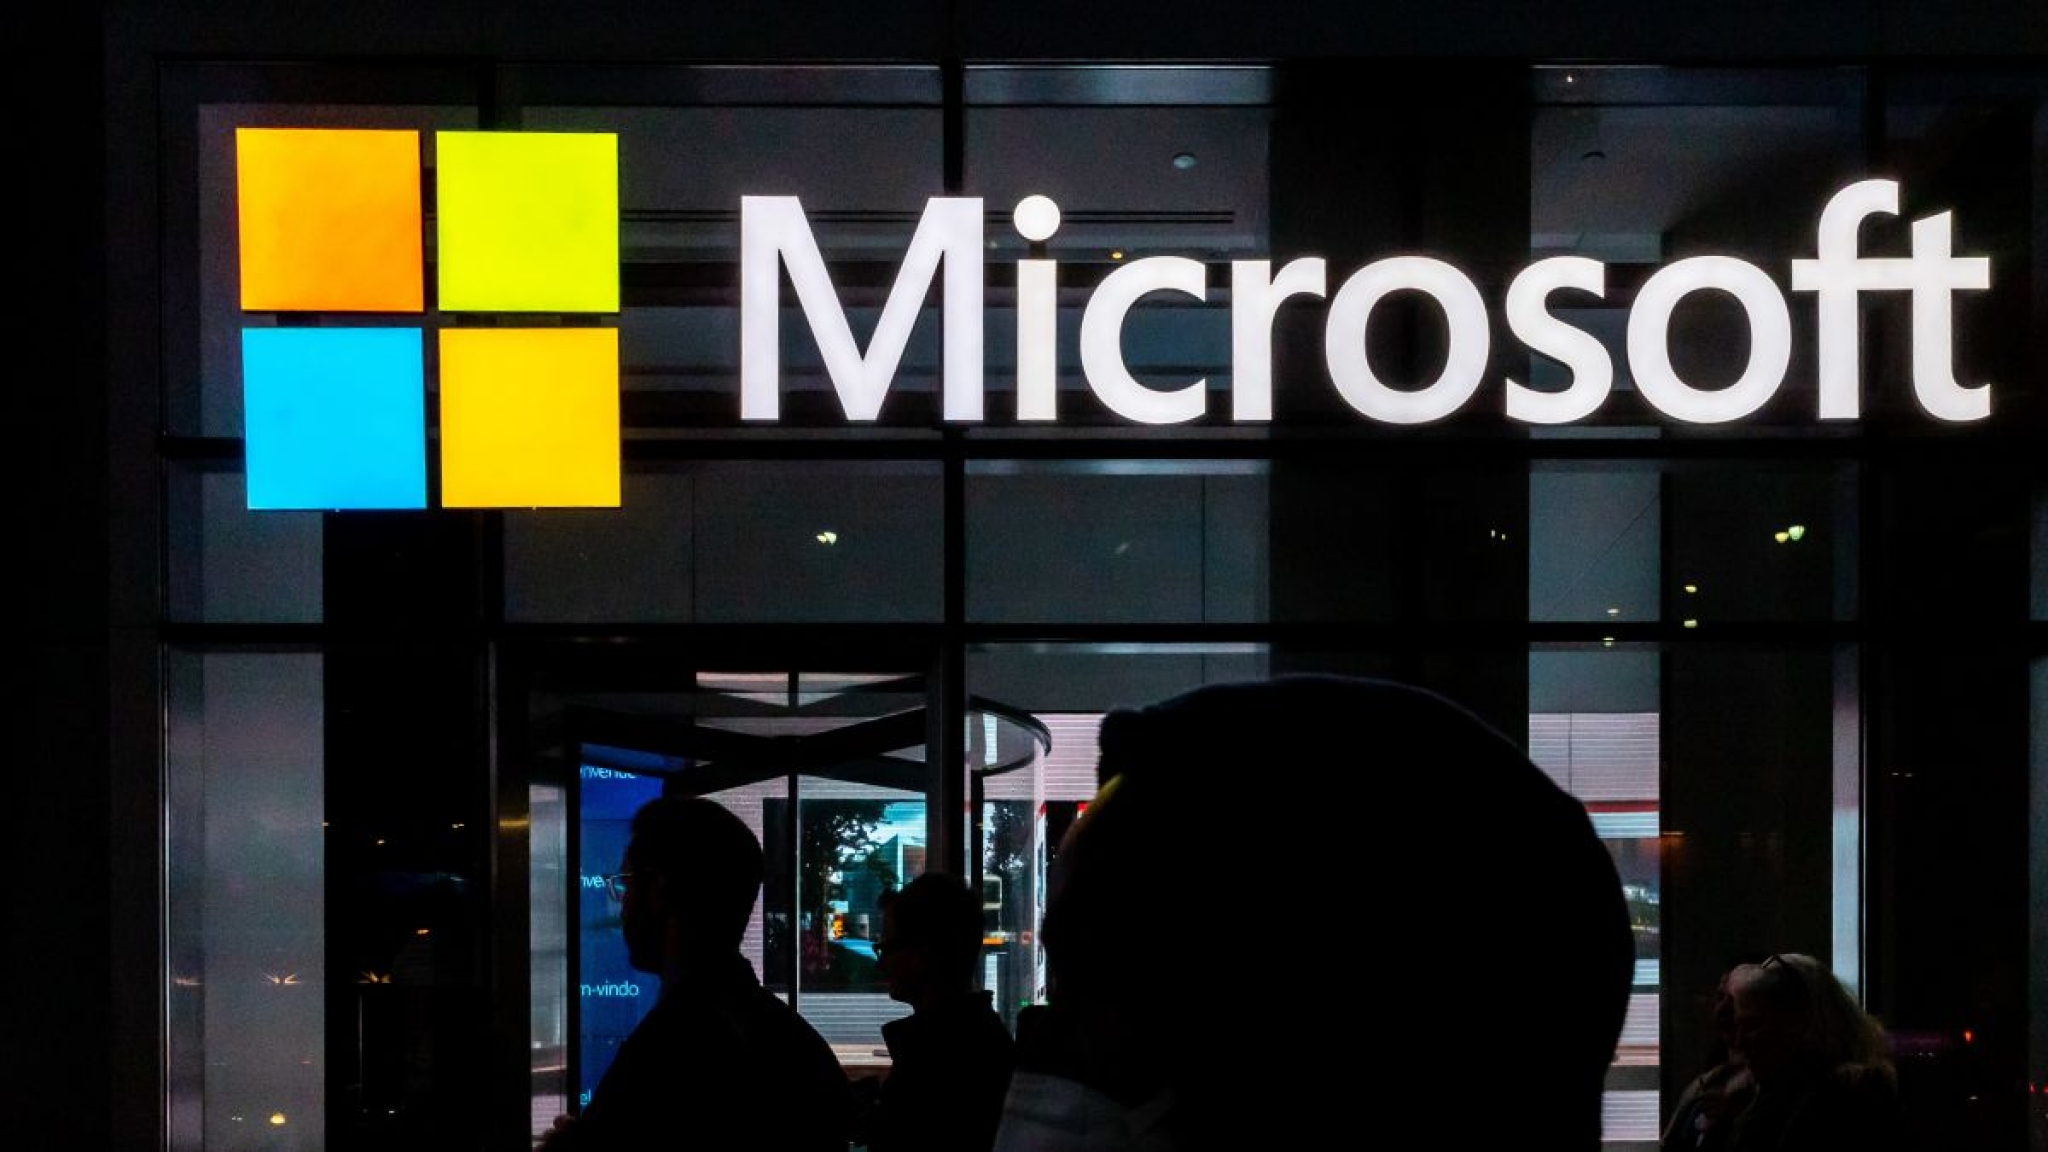 Microsoft Is Reportedly in Talks to Scoop Up AI Firm Nuance Communications for $16 Billion